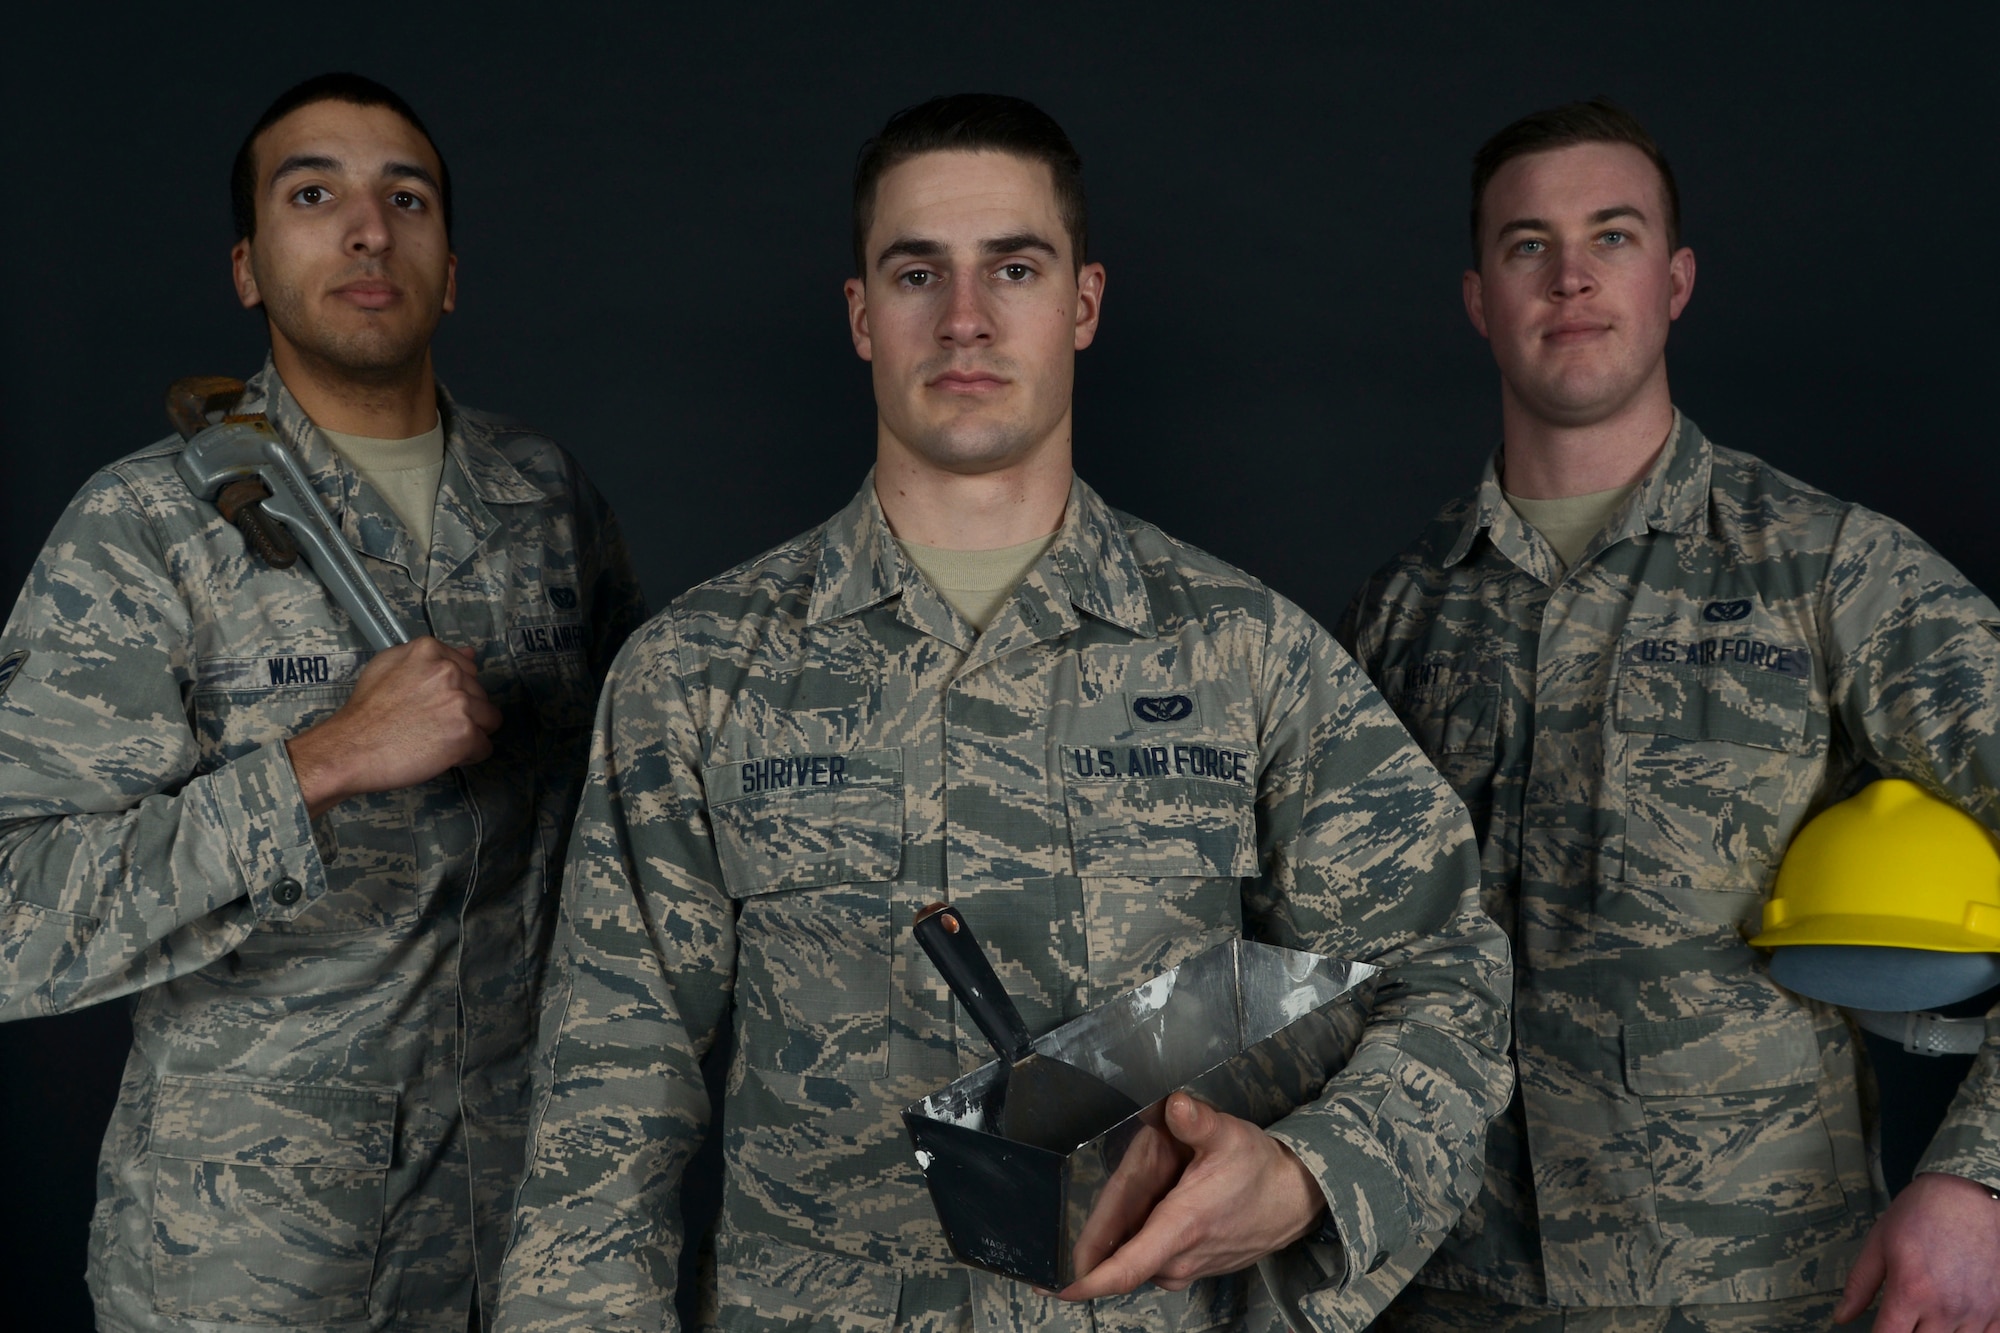 Members of the 5th Civil Engineer Squadron pose for a photo at Minot Air Force Base, N.D., Feb. 2, 2017. The CE Smart Team is responsible for improving various facilities on base by completing work orders by request and fixing any problems before they arise. (U.S. Air Force photo/Airman 1st Class Jessica Weissman)